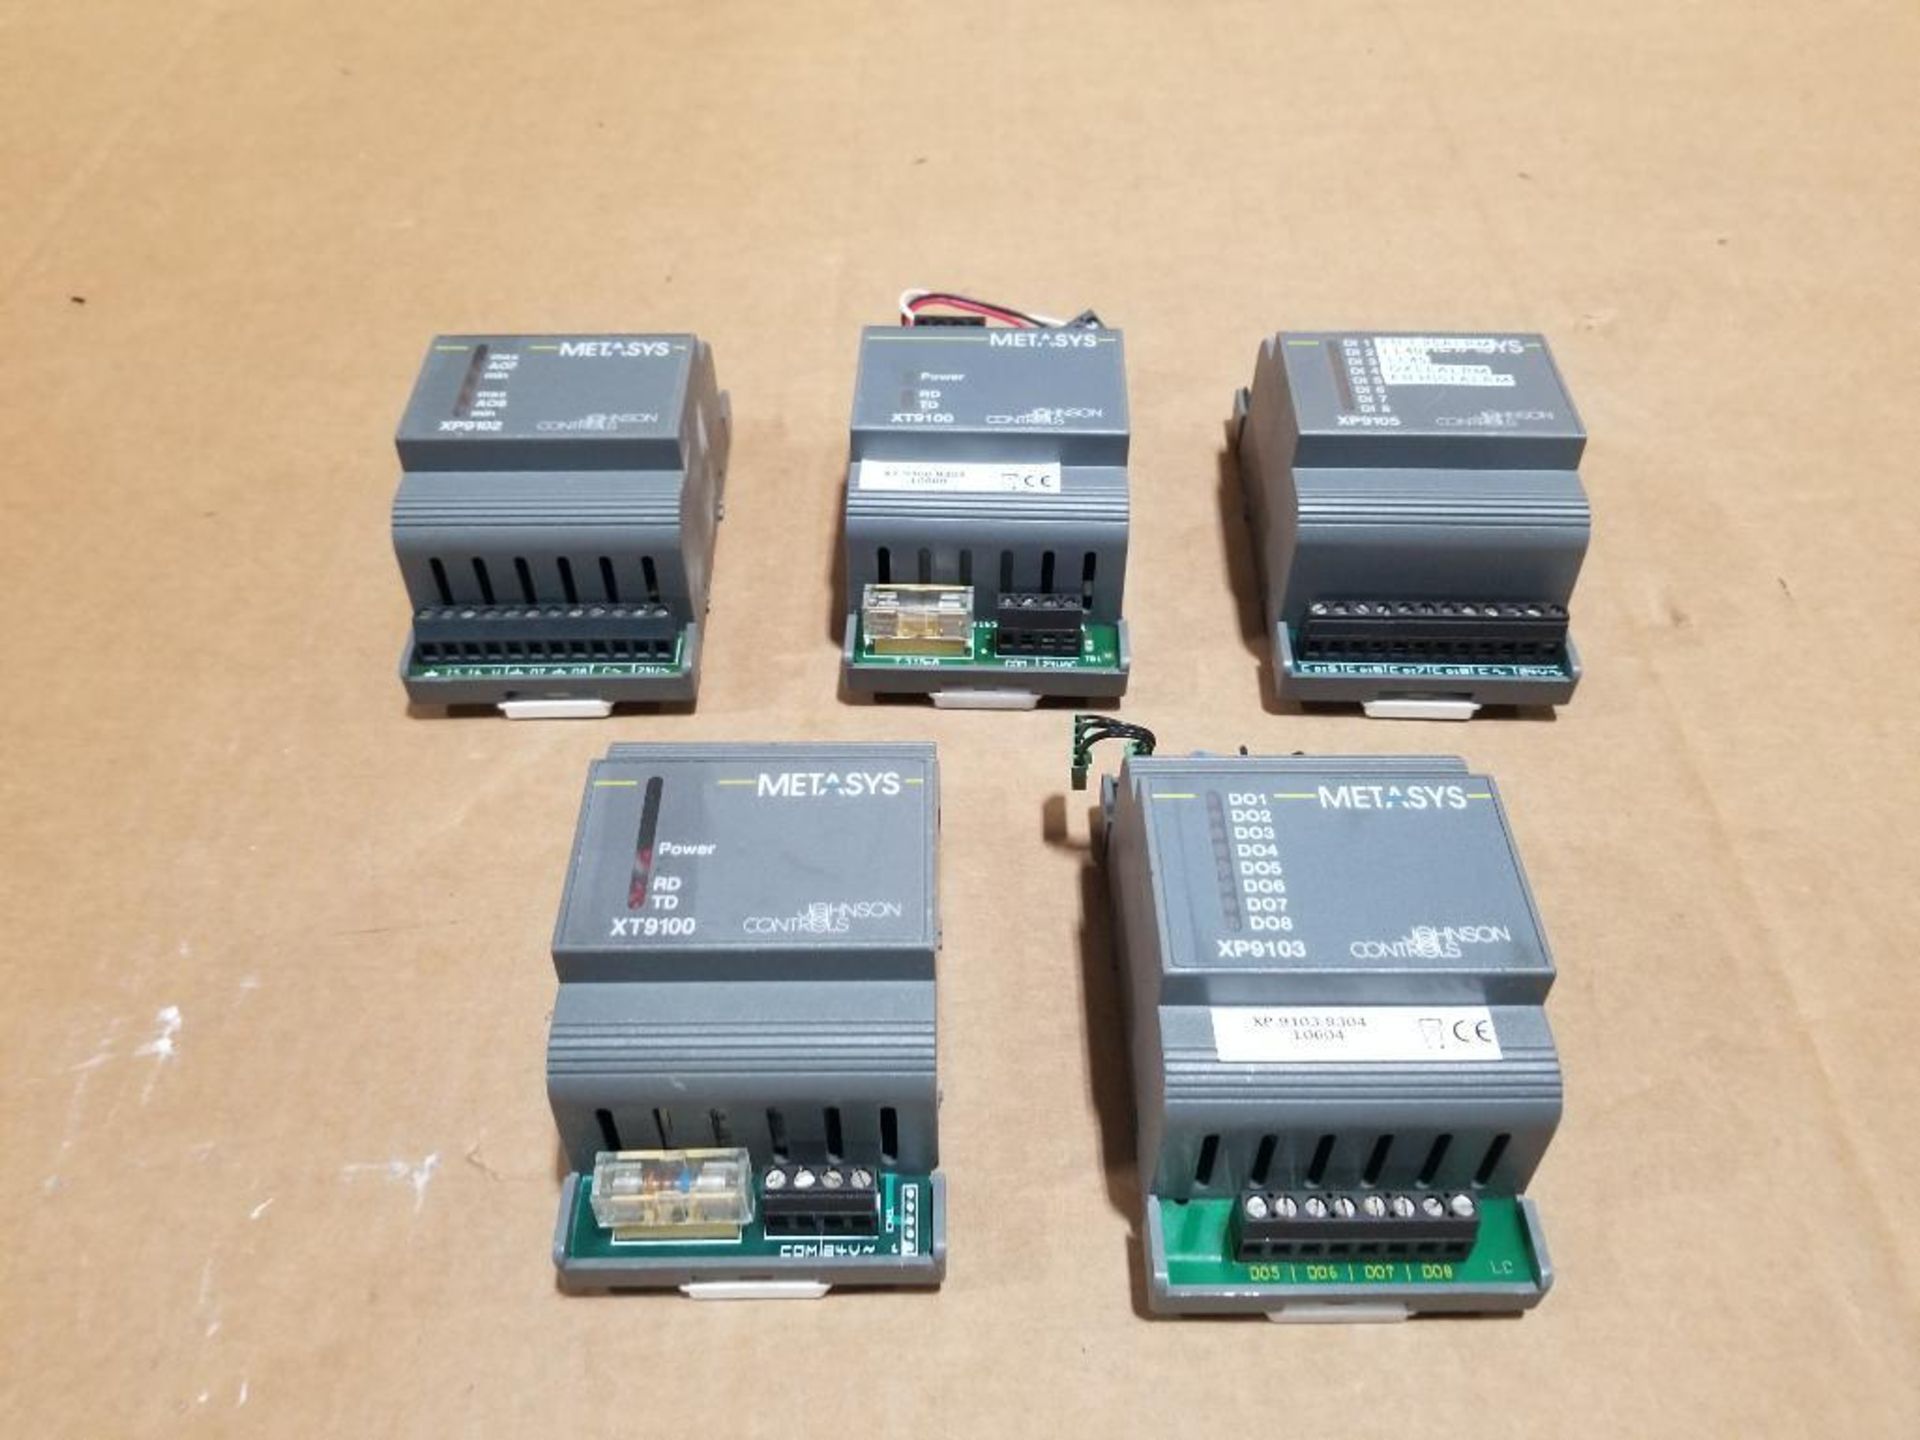 Qty 5 - Johnson Controls Metasys controllers.